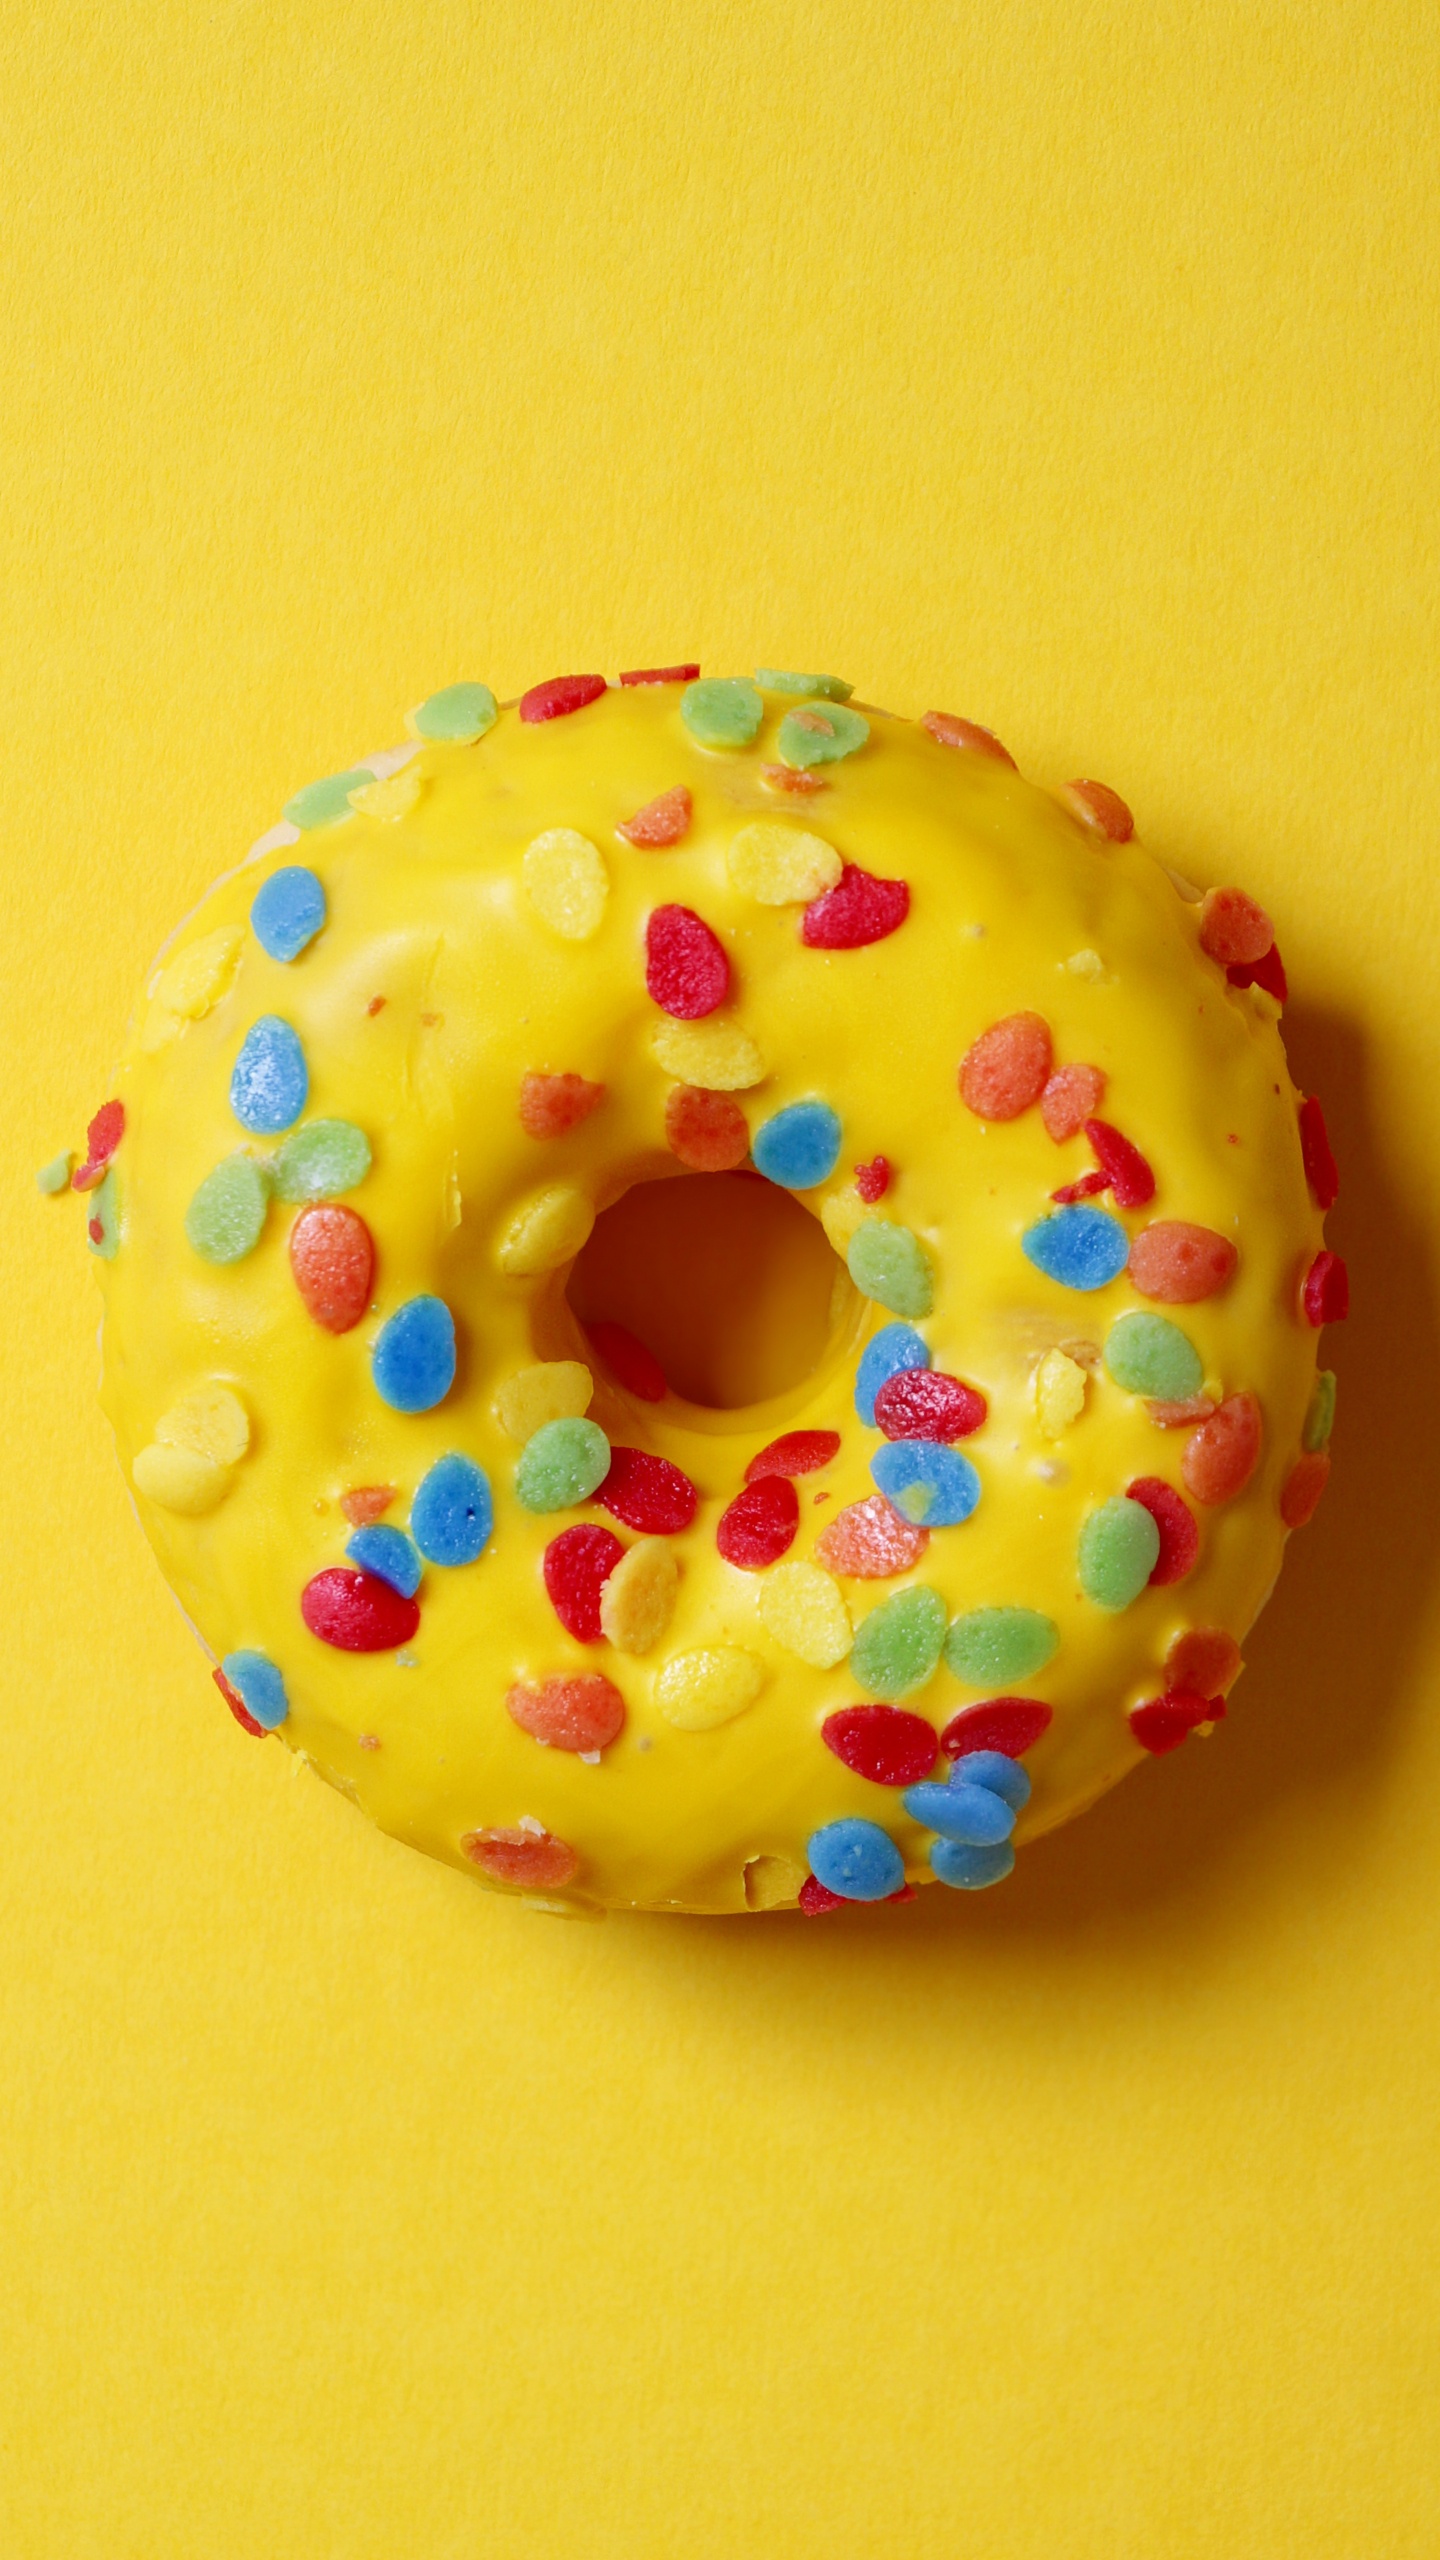 Doughnut With Sprinkles on Yellow Surface. Wallpaper in 1440x2560 Resolution